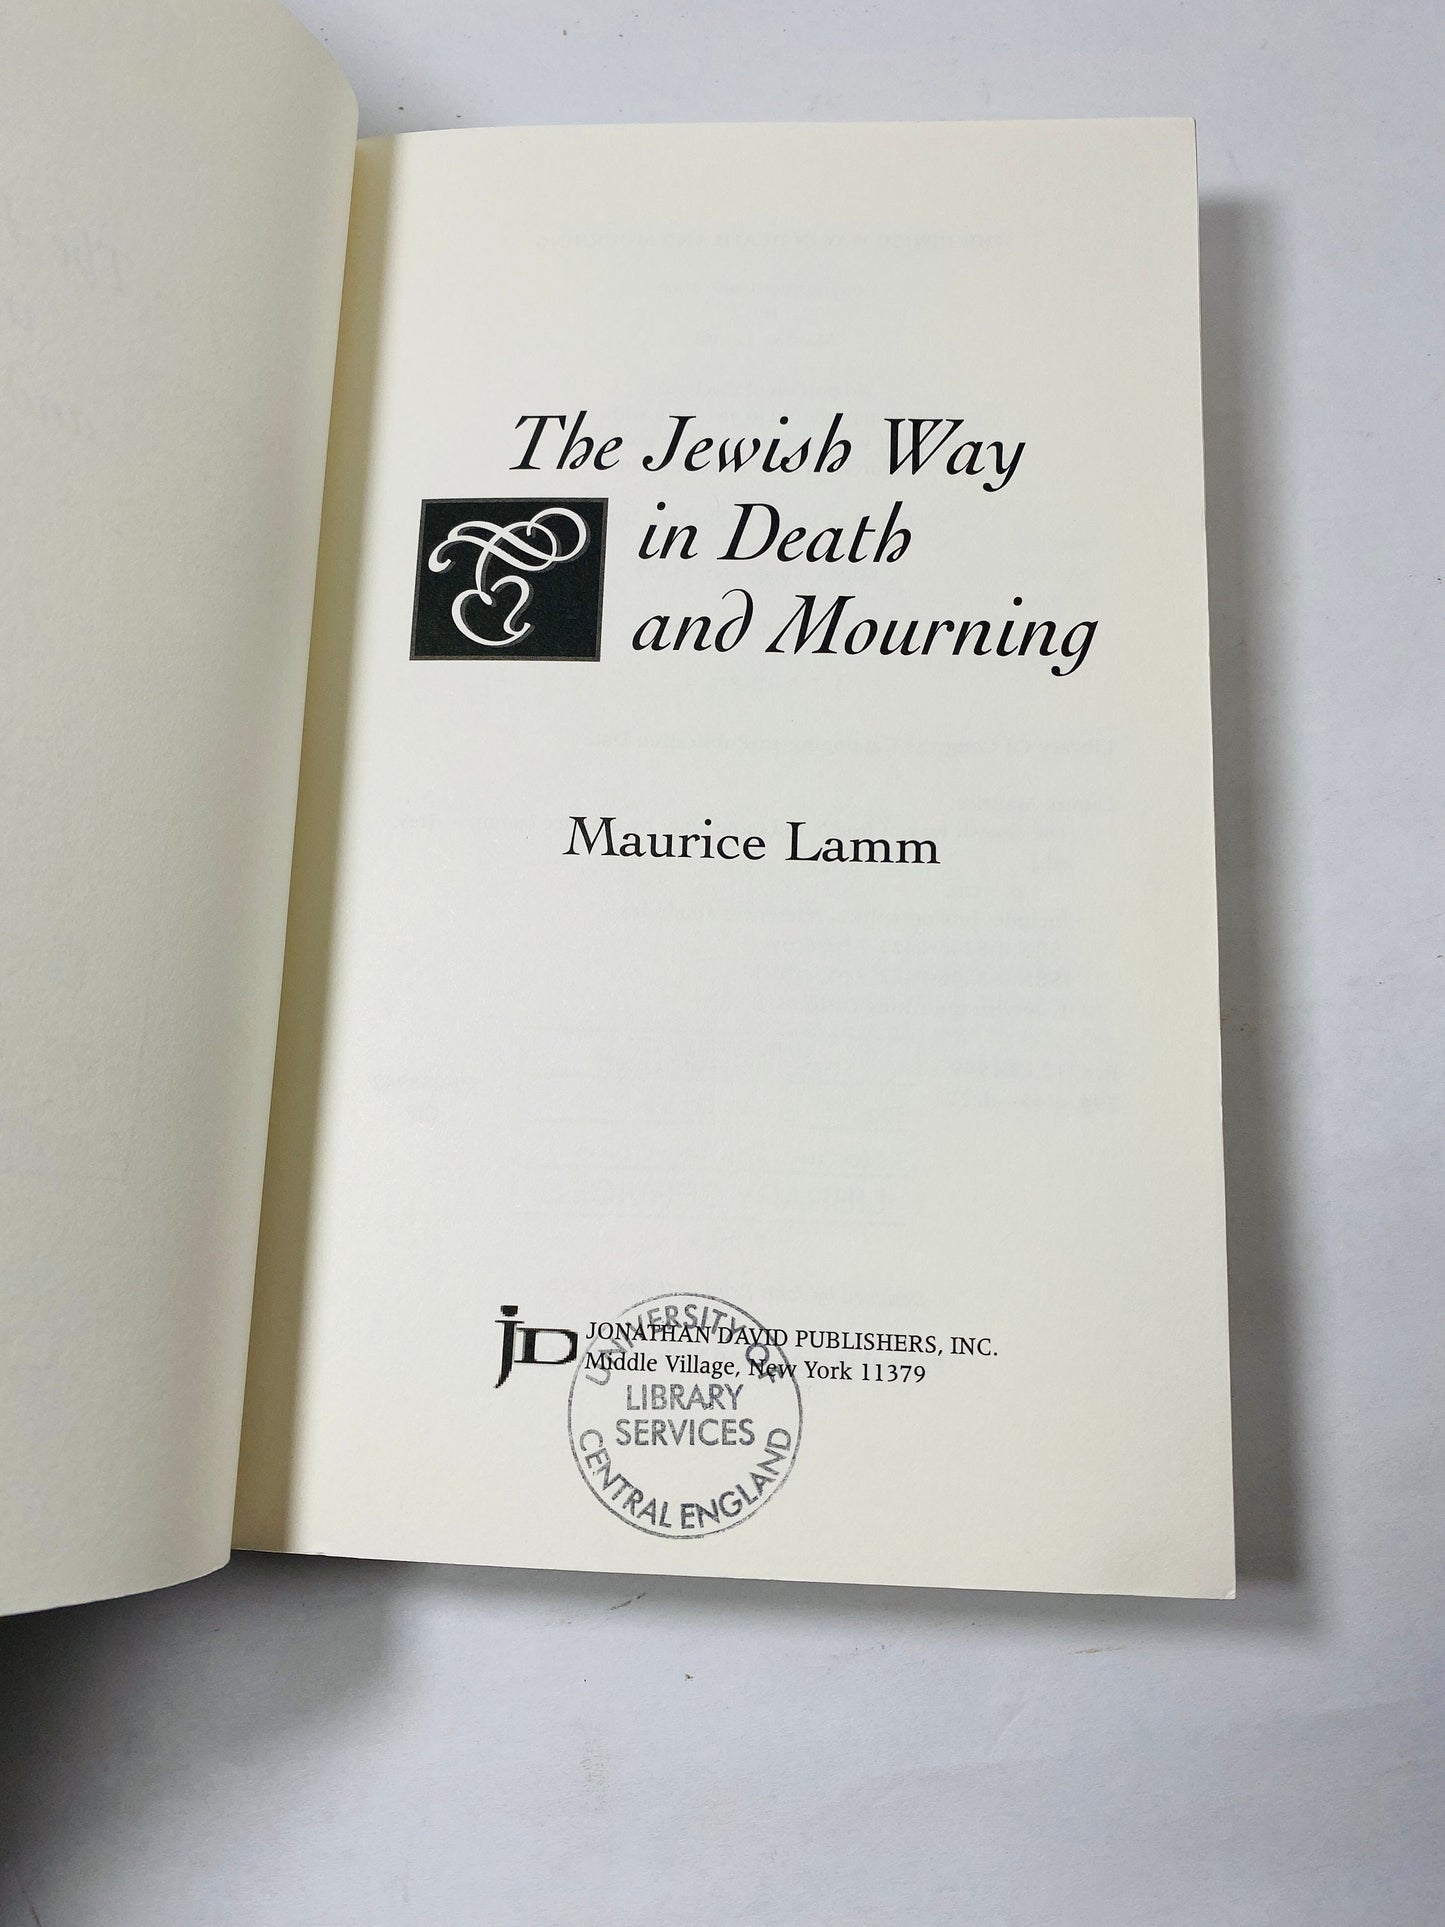 Jewish Way in Death and Mourning vintage paperback book by Maurice Lamm University of England Library customs in mourning